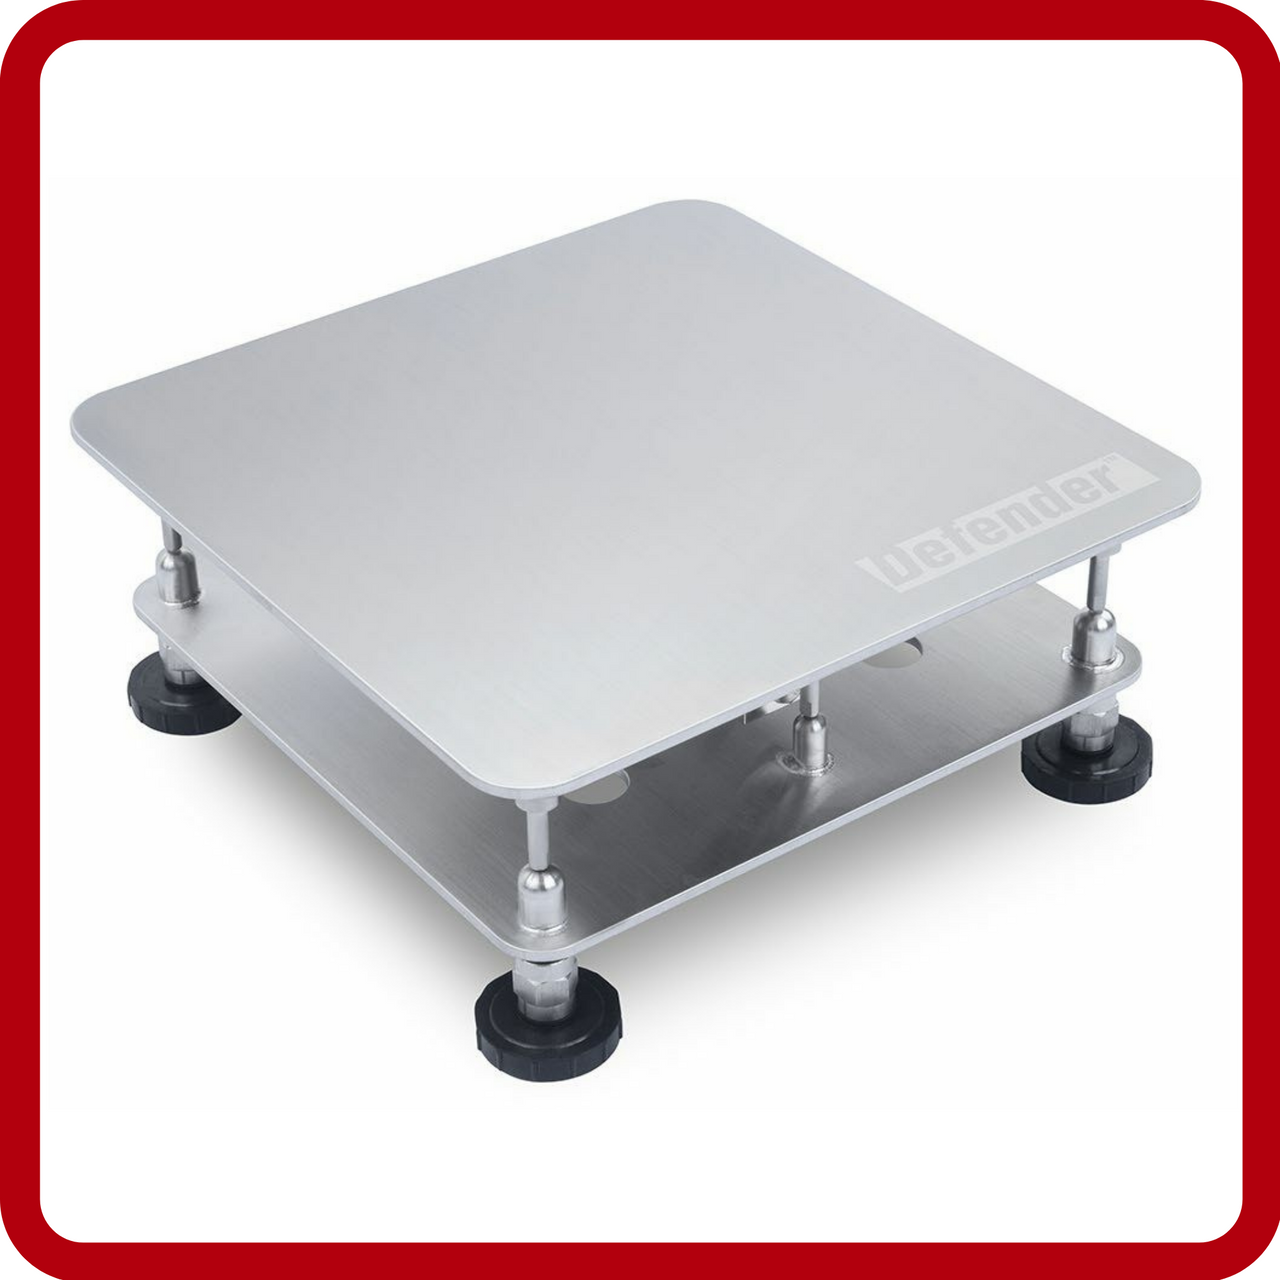 Ohaus Defender 6000 Series Bases